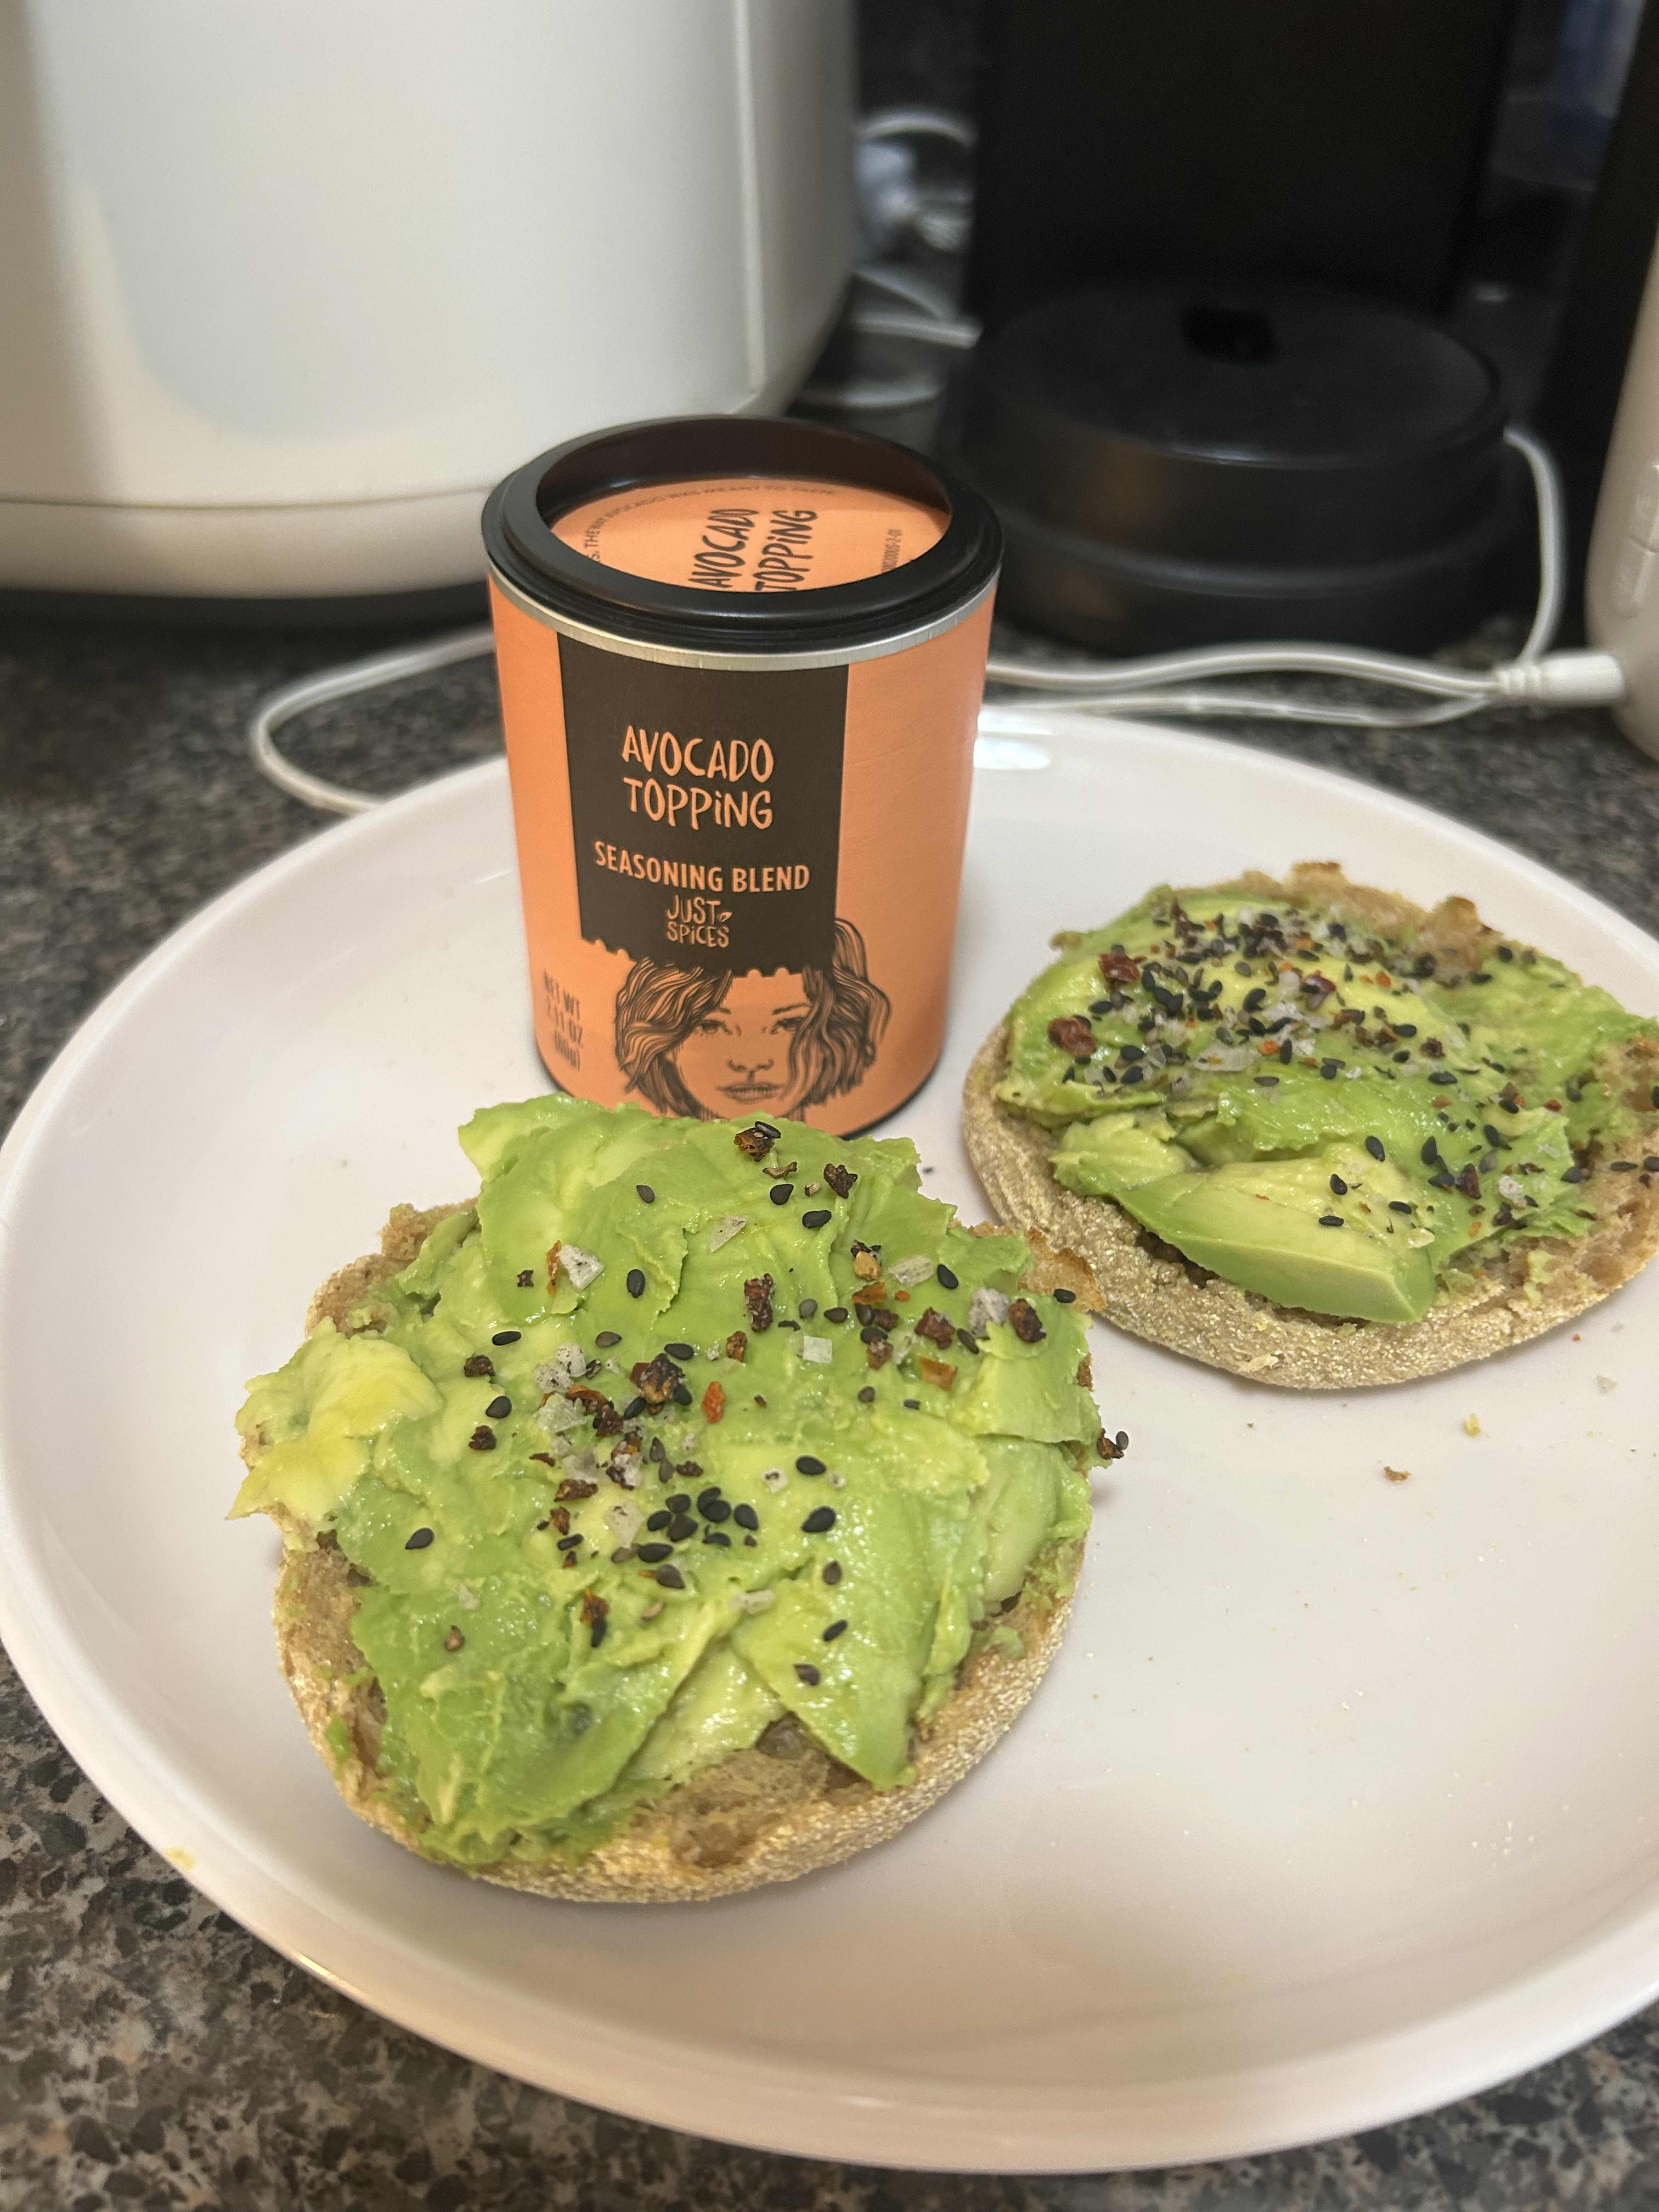 Why I Love Just Spices' Avocado Topping: Tried & Tested